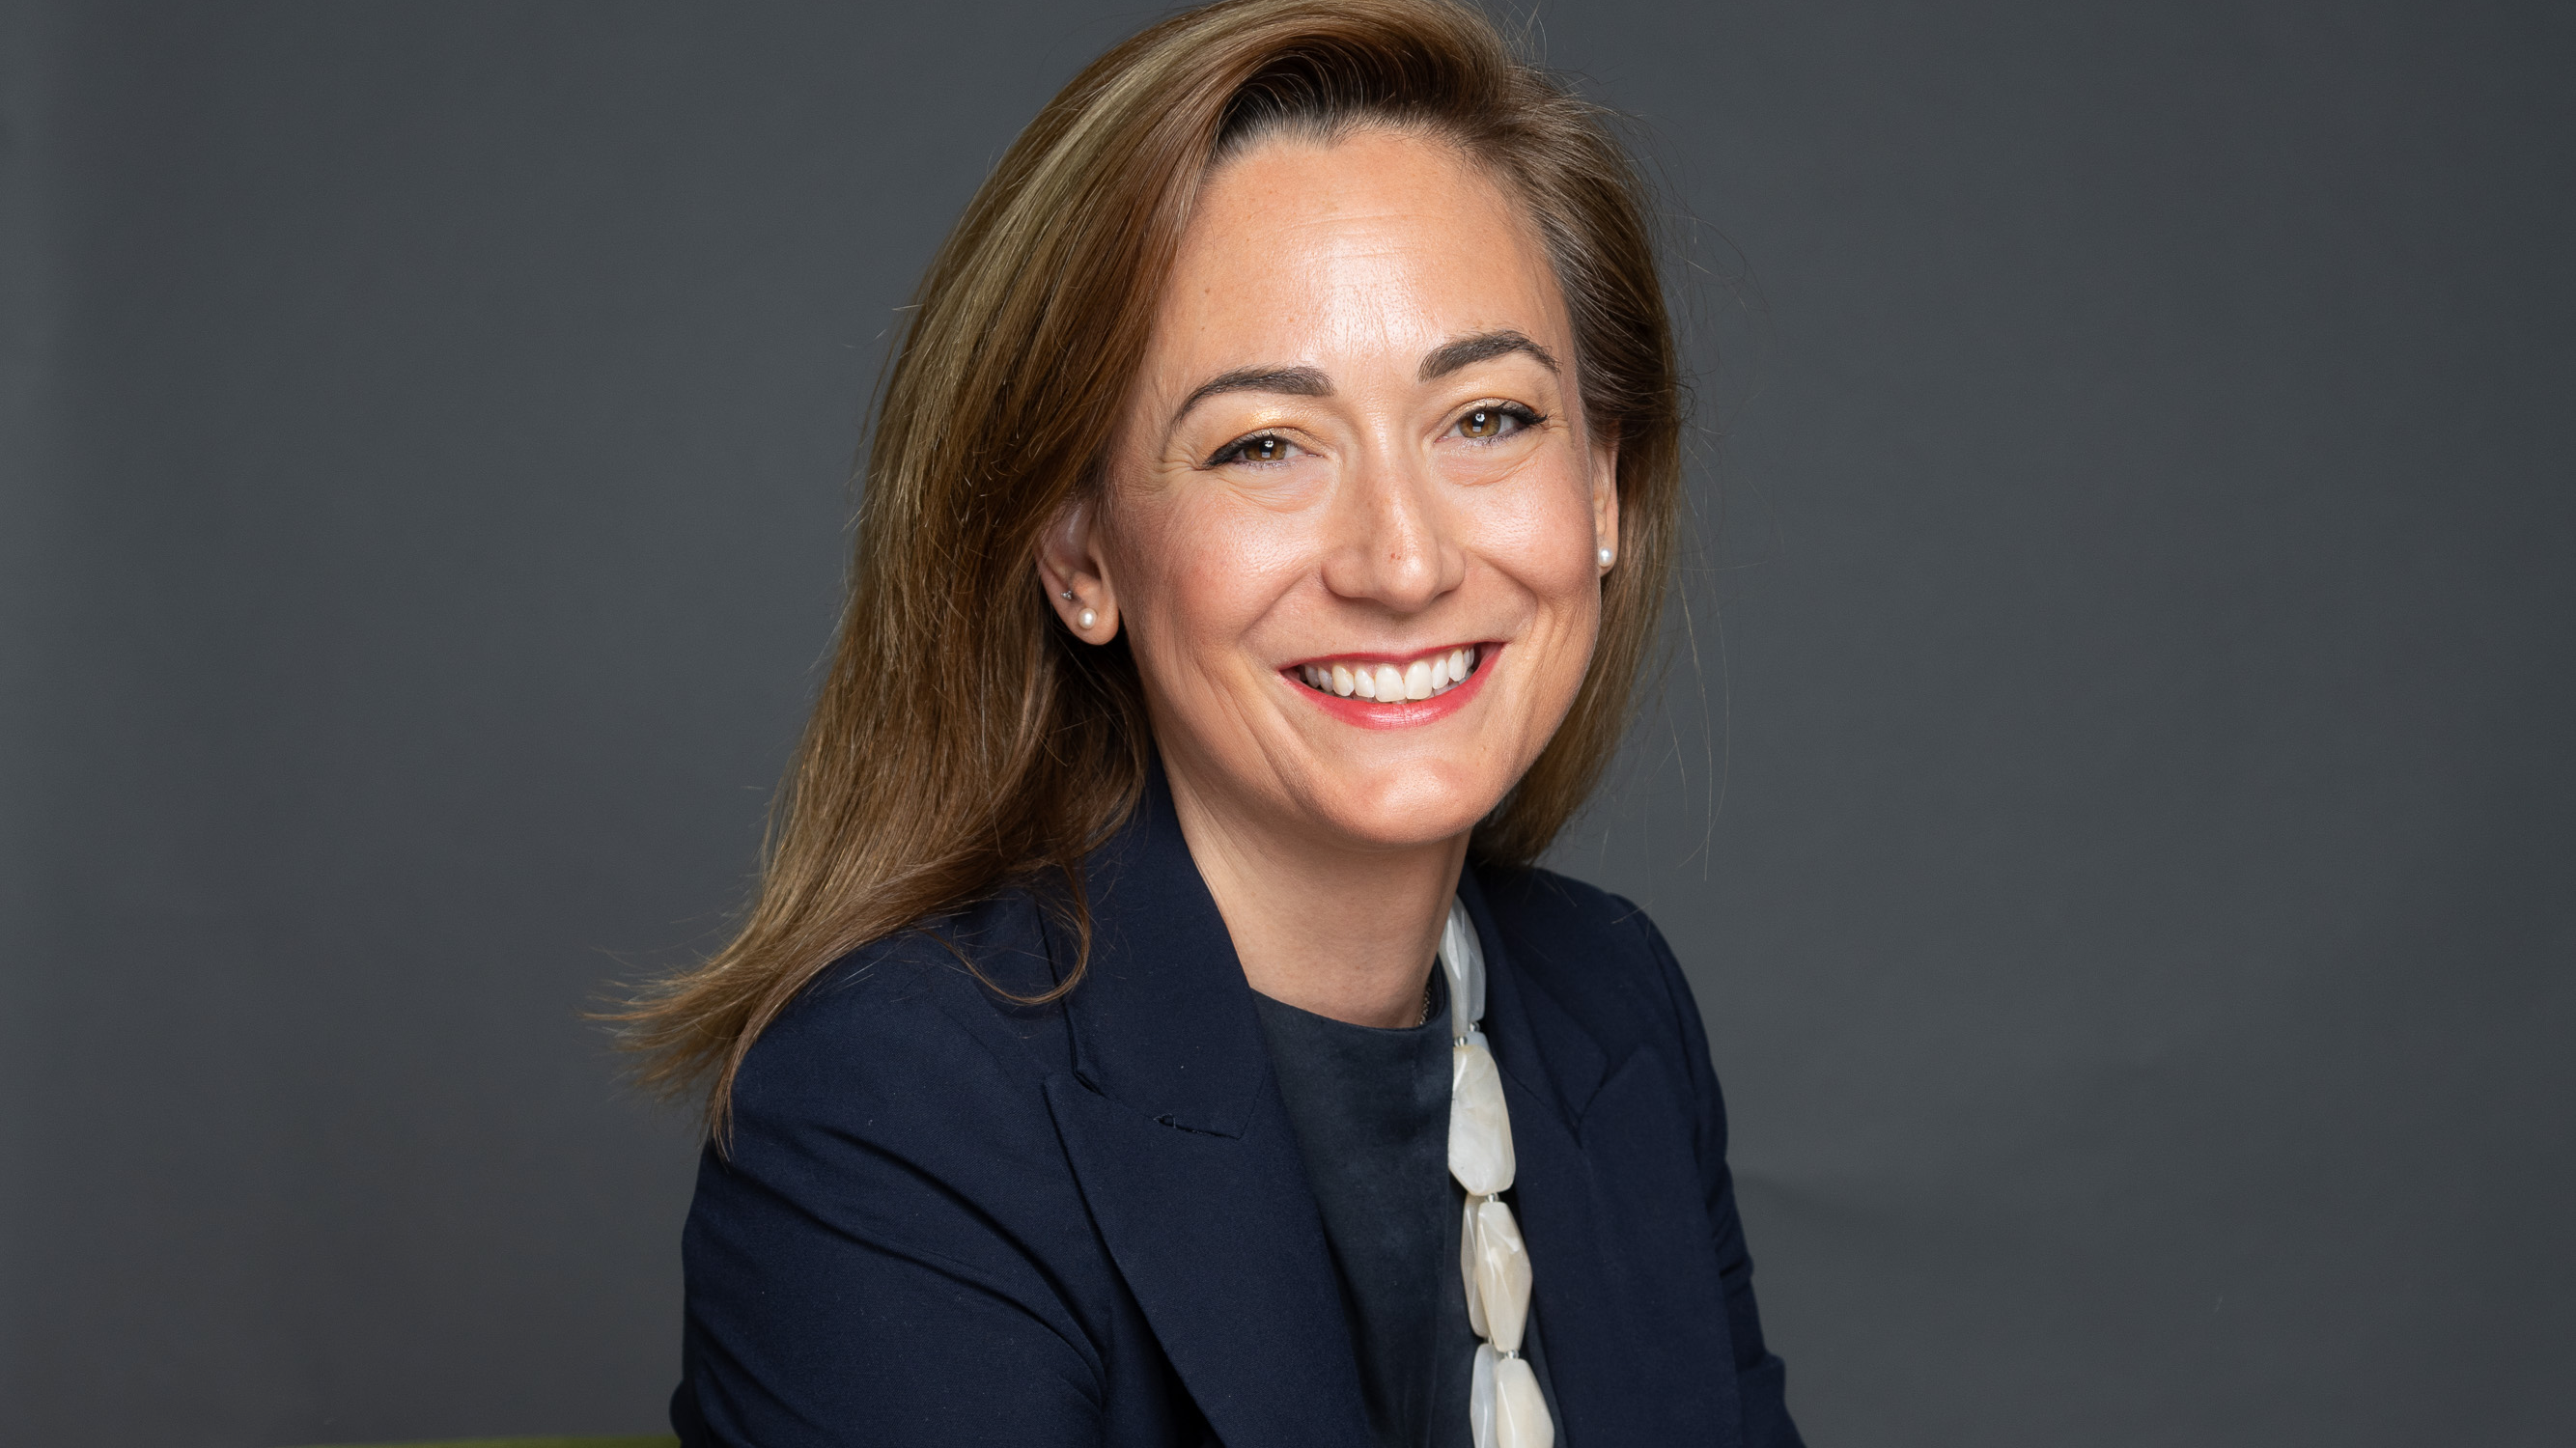 https://adgully.me/post/4639/fiona-black-assumes-role-as-integrated-client-growth-lead-for-cart-mena